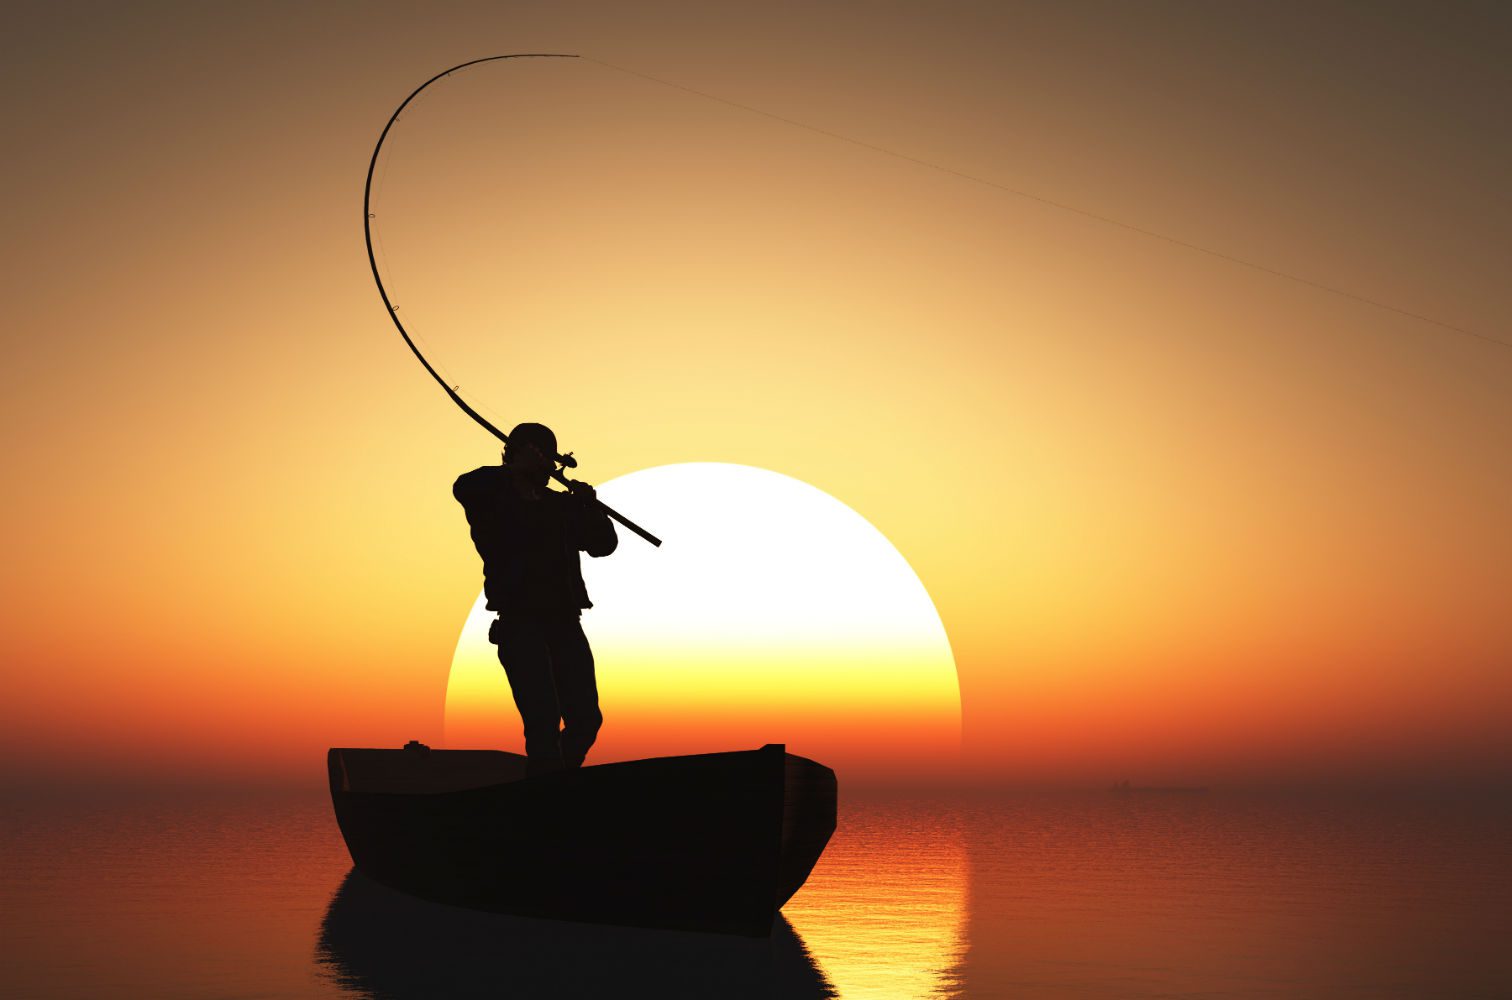 a man on a boat holding a fishing rod